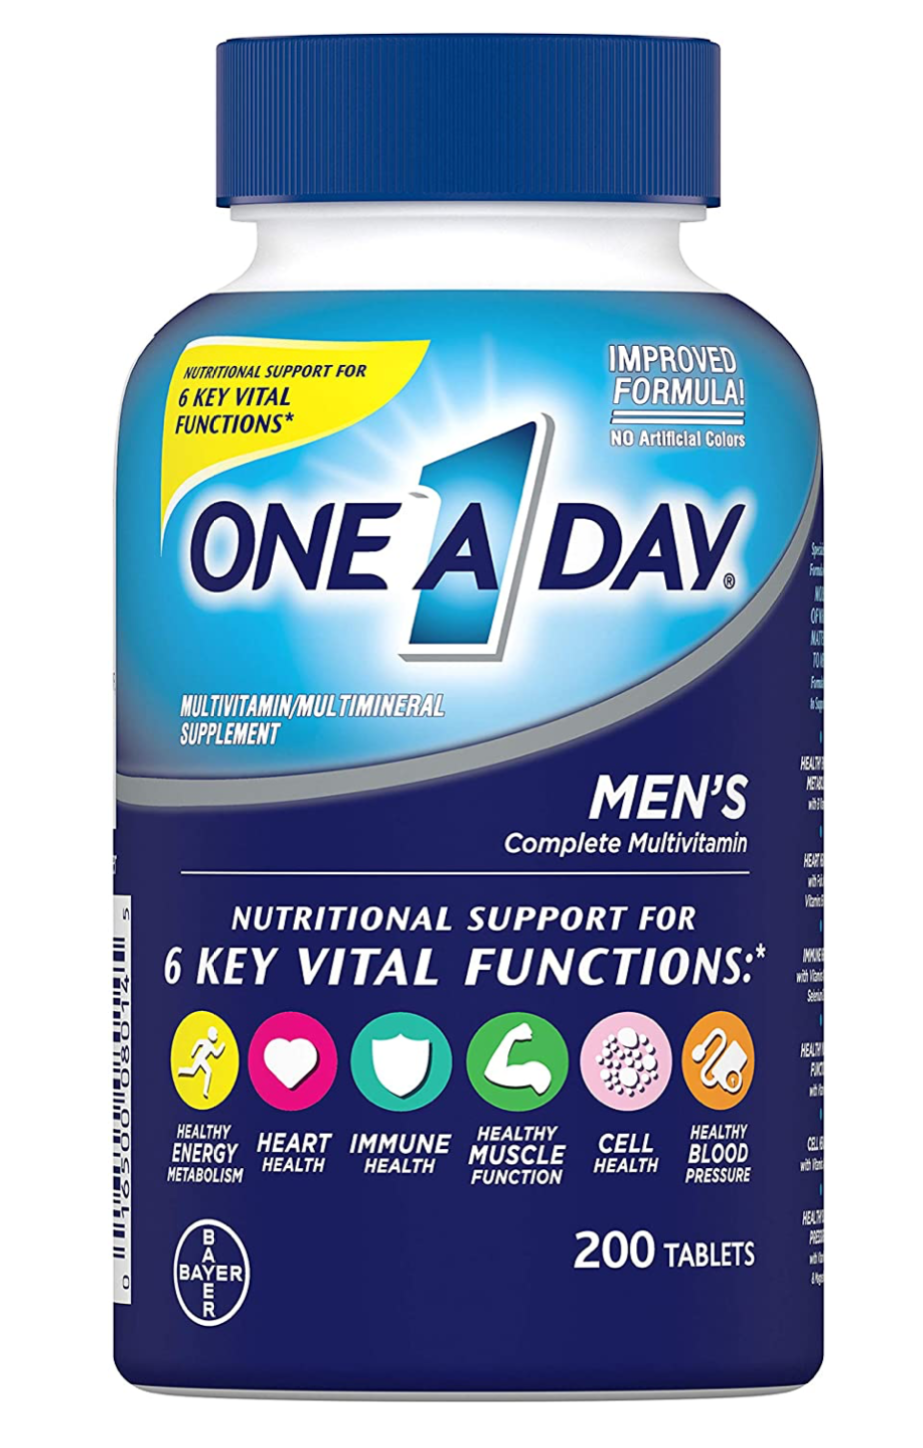 One A Day Men's Multivitamin, Supplement with Multivitamins and more - 200  Pills